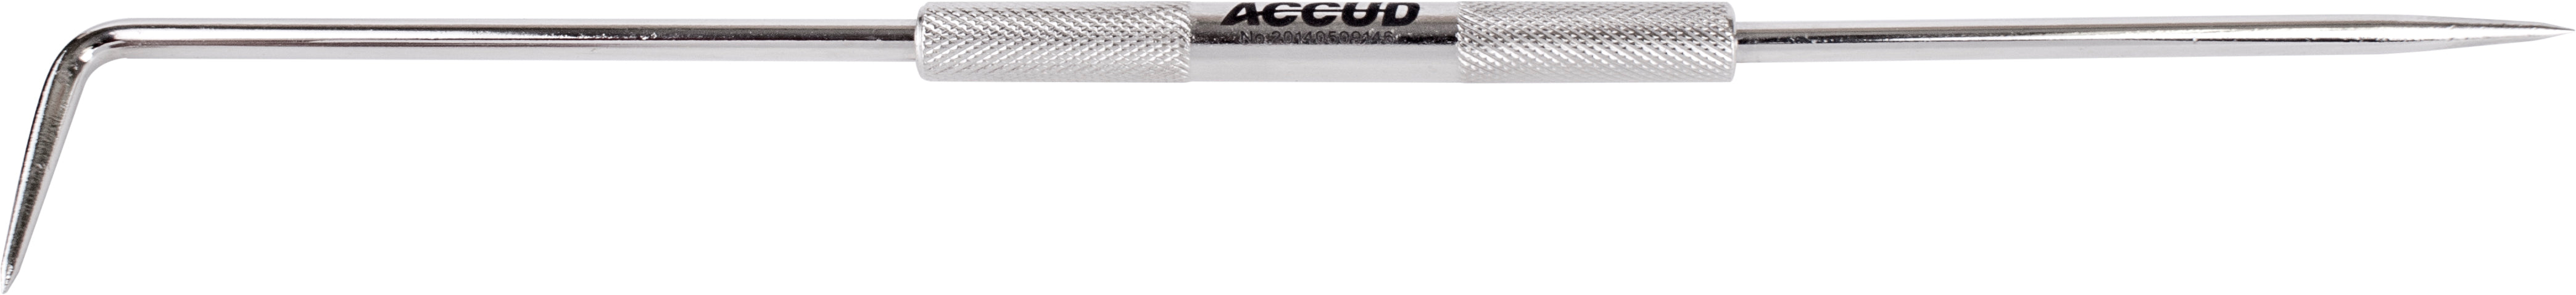 accud-scriber-250mm-hardened-tips-nickel-plated-ac995-009-01-1